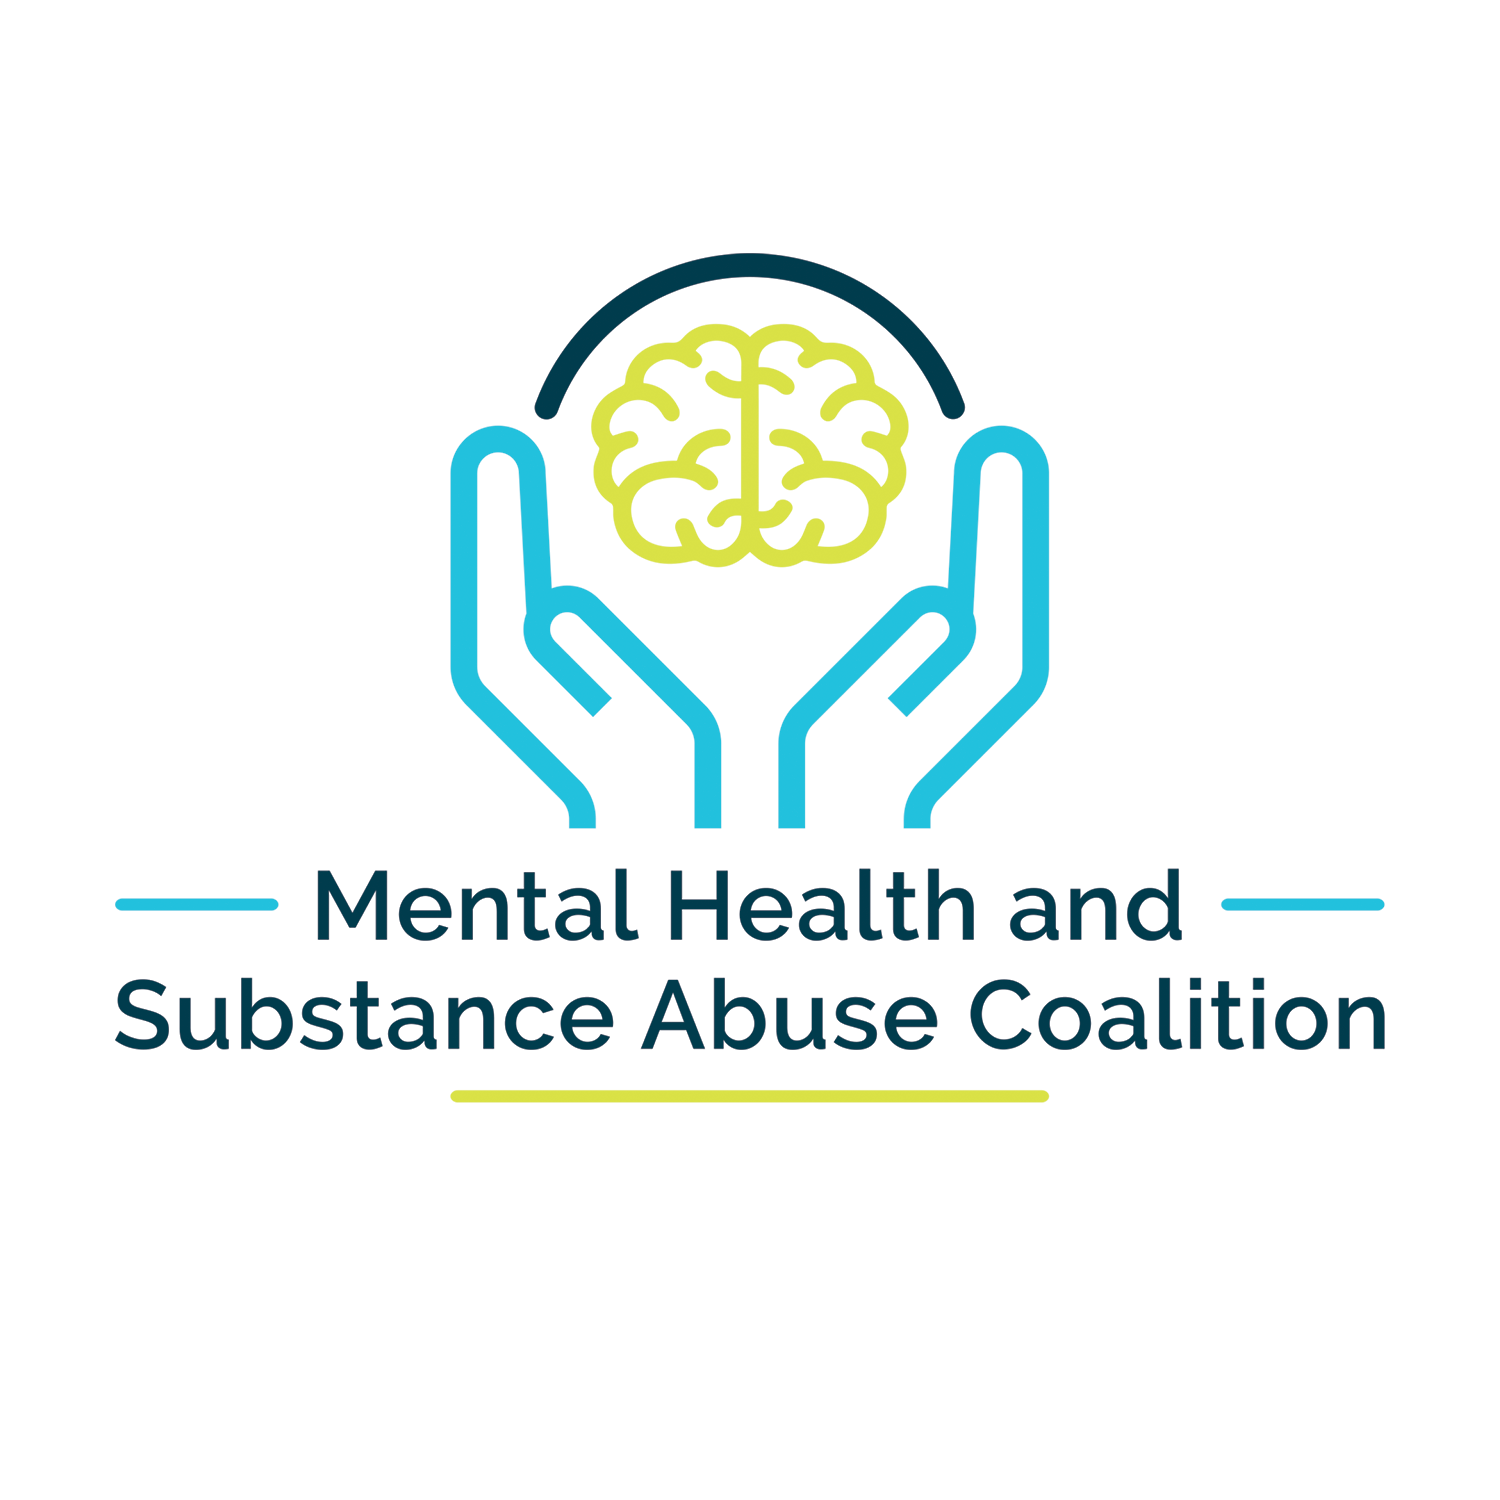 Mental Health and Substance Abuse Coalition